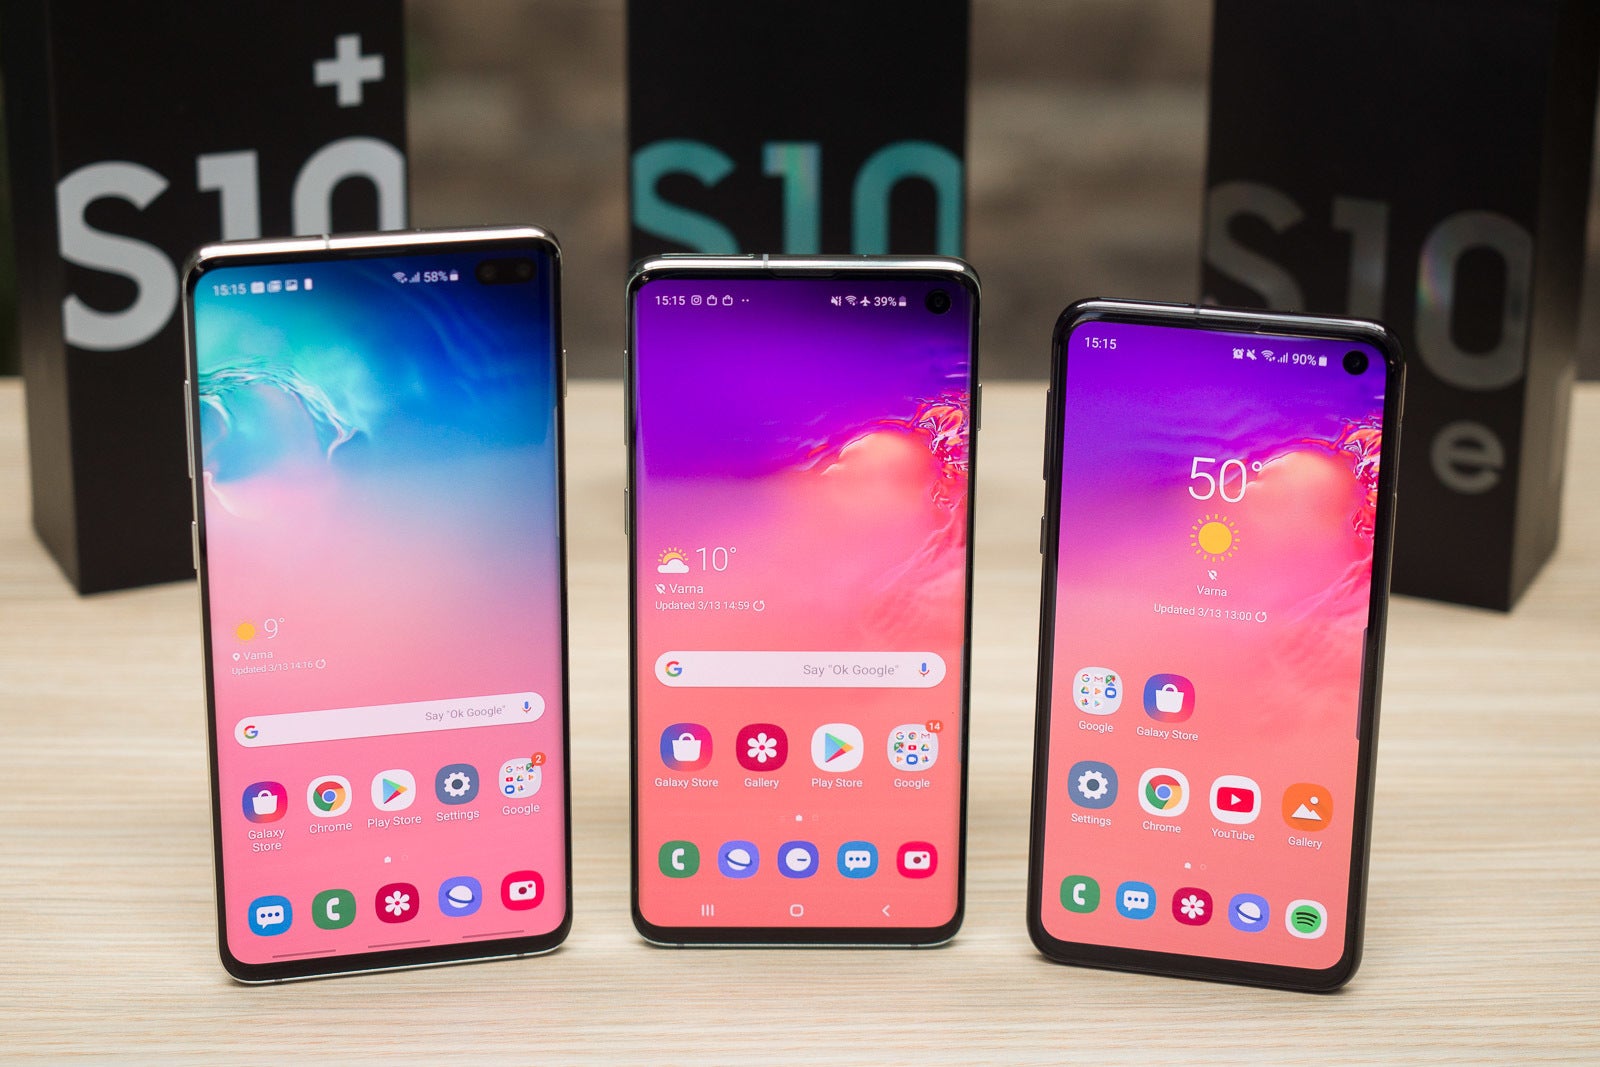 Samsung Galaxy S10, S10+, and S10e - Galaxy S10 sales are helping Samsung regain market share in China